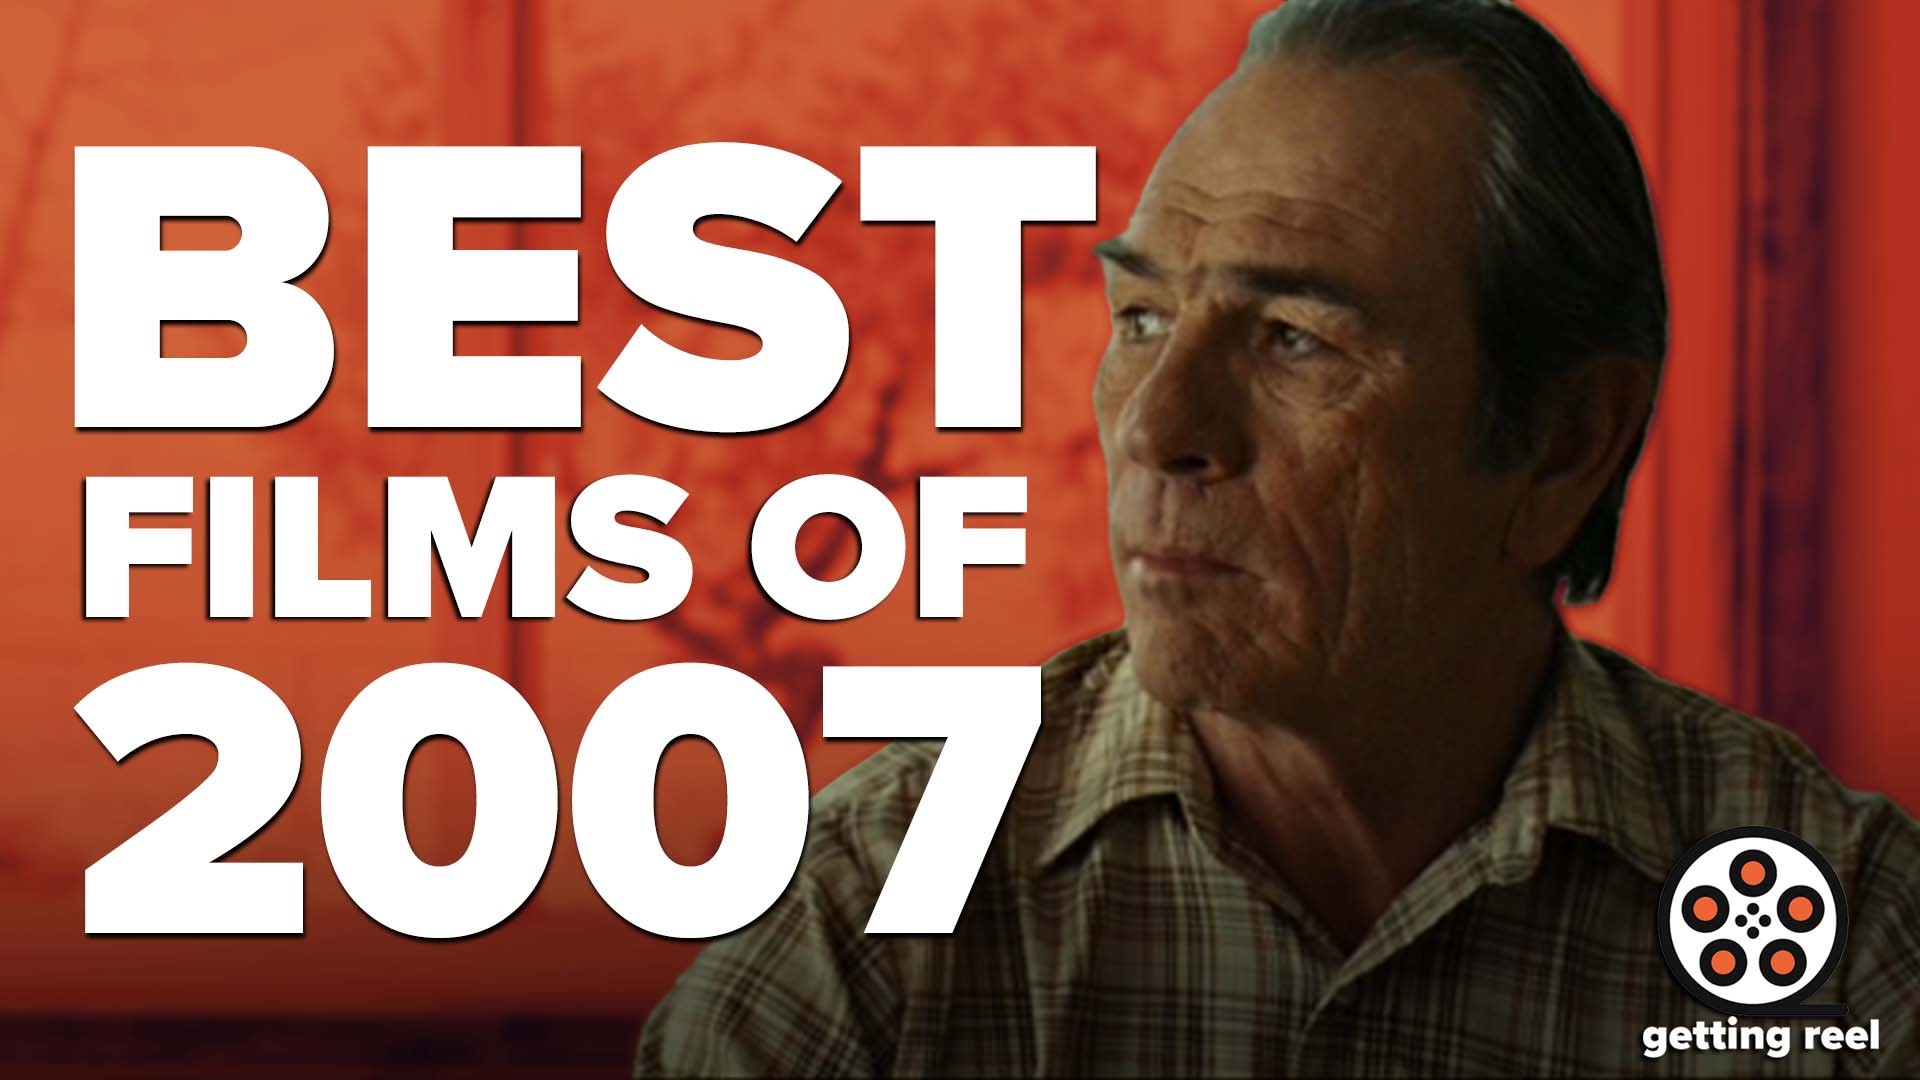 In 2007 we got the now iconic films No Country for Old Men, Juno, There Will Be Blood, and Zodiac. And wouldn't you know it, they all made our list!